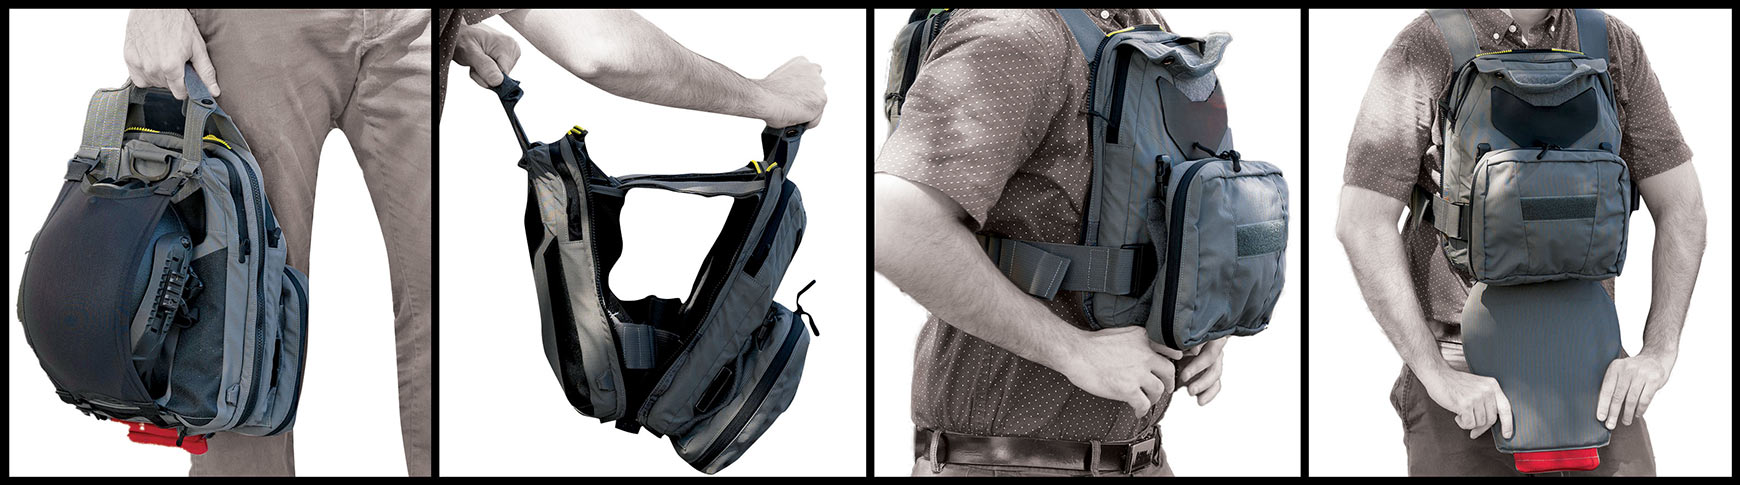 pack rack back pack the turns into a plate carrier. Ballistic backpack.